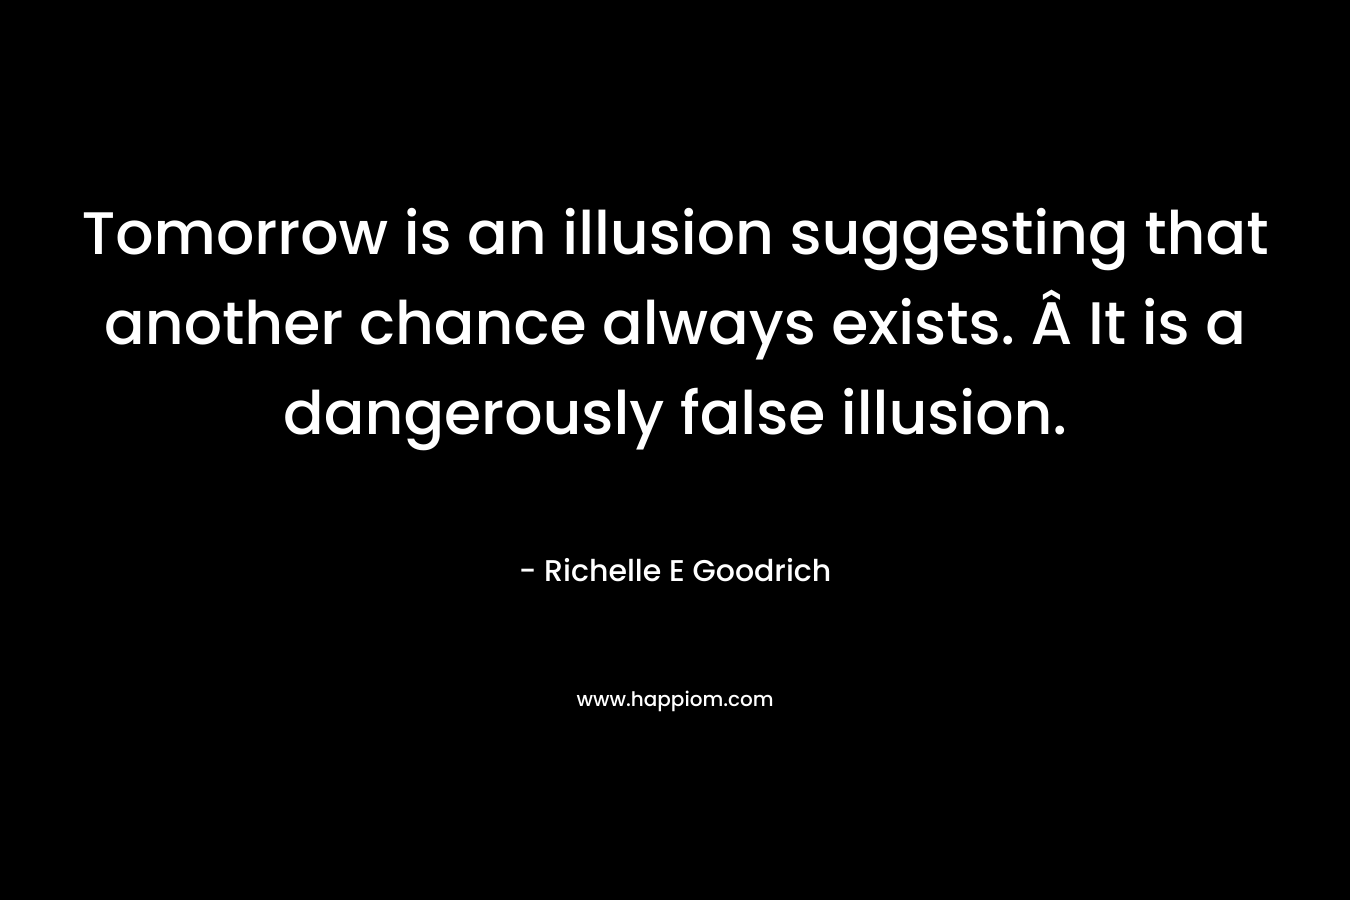 Tomorrow is an illusion suggesting that another chance always exists. Â It is a dangerously false illusion.